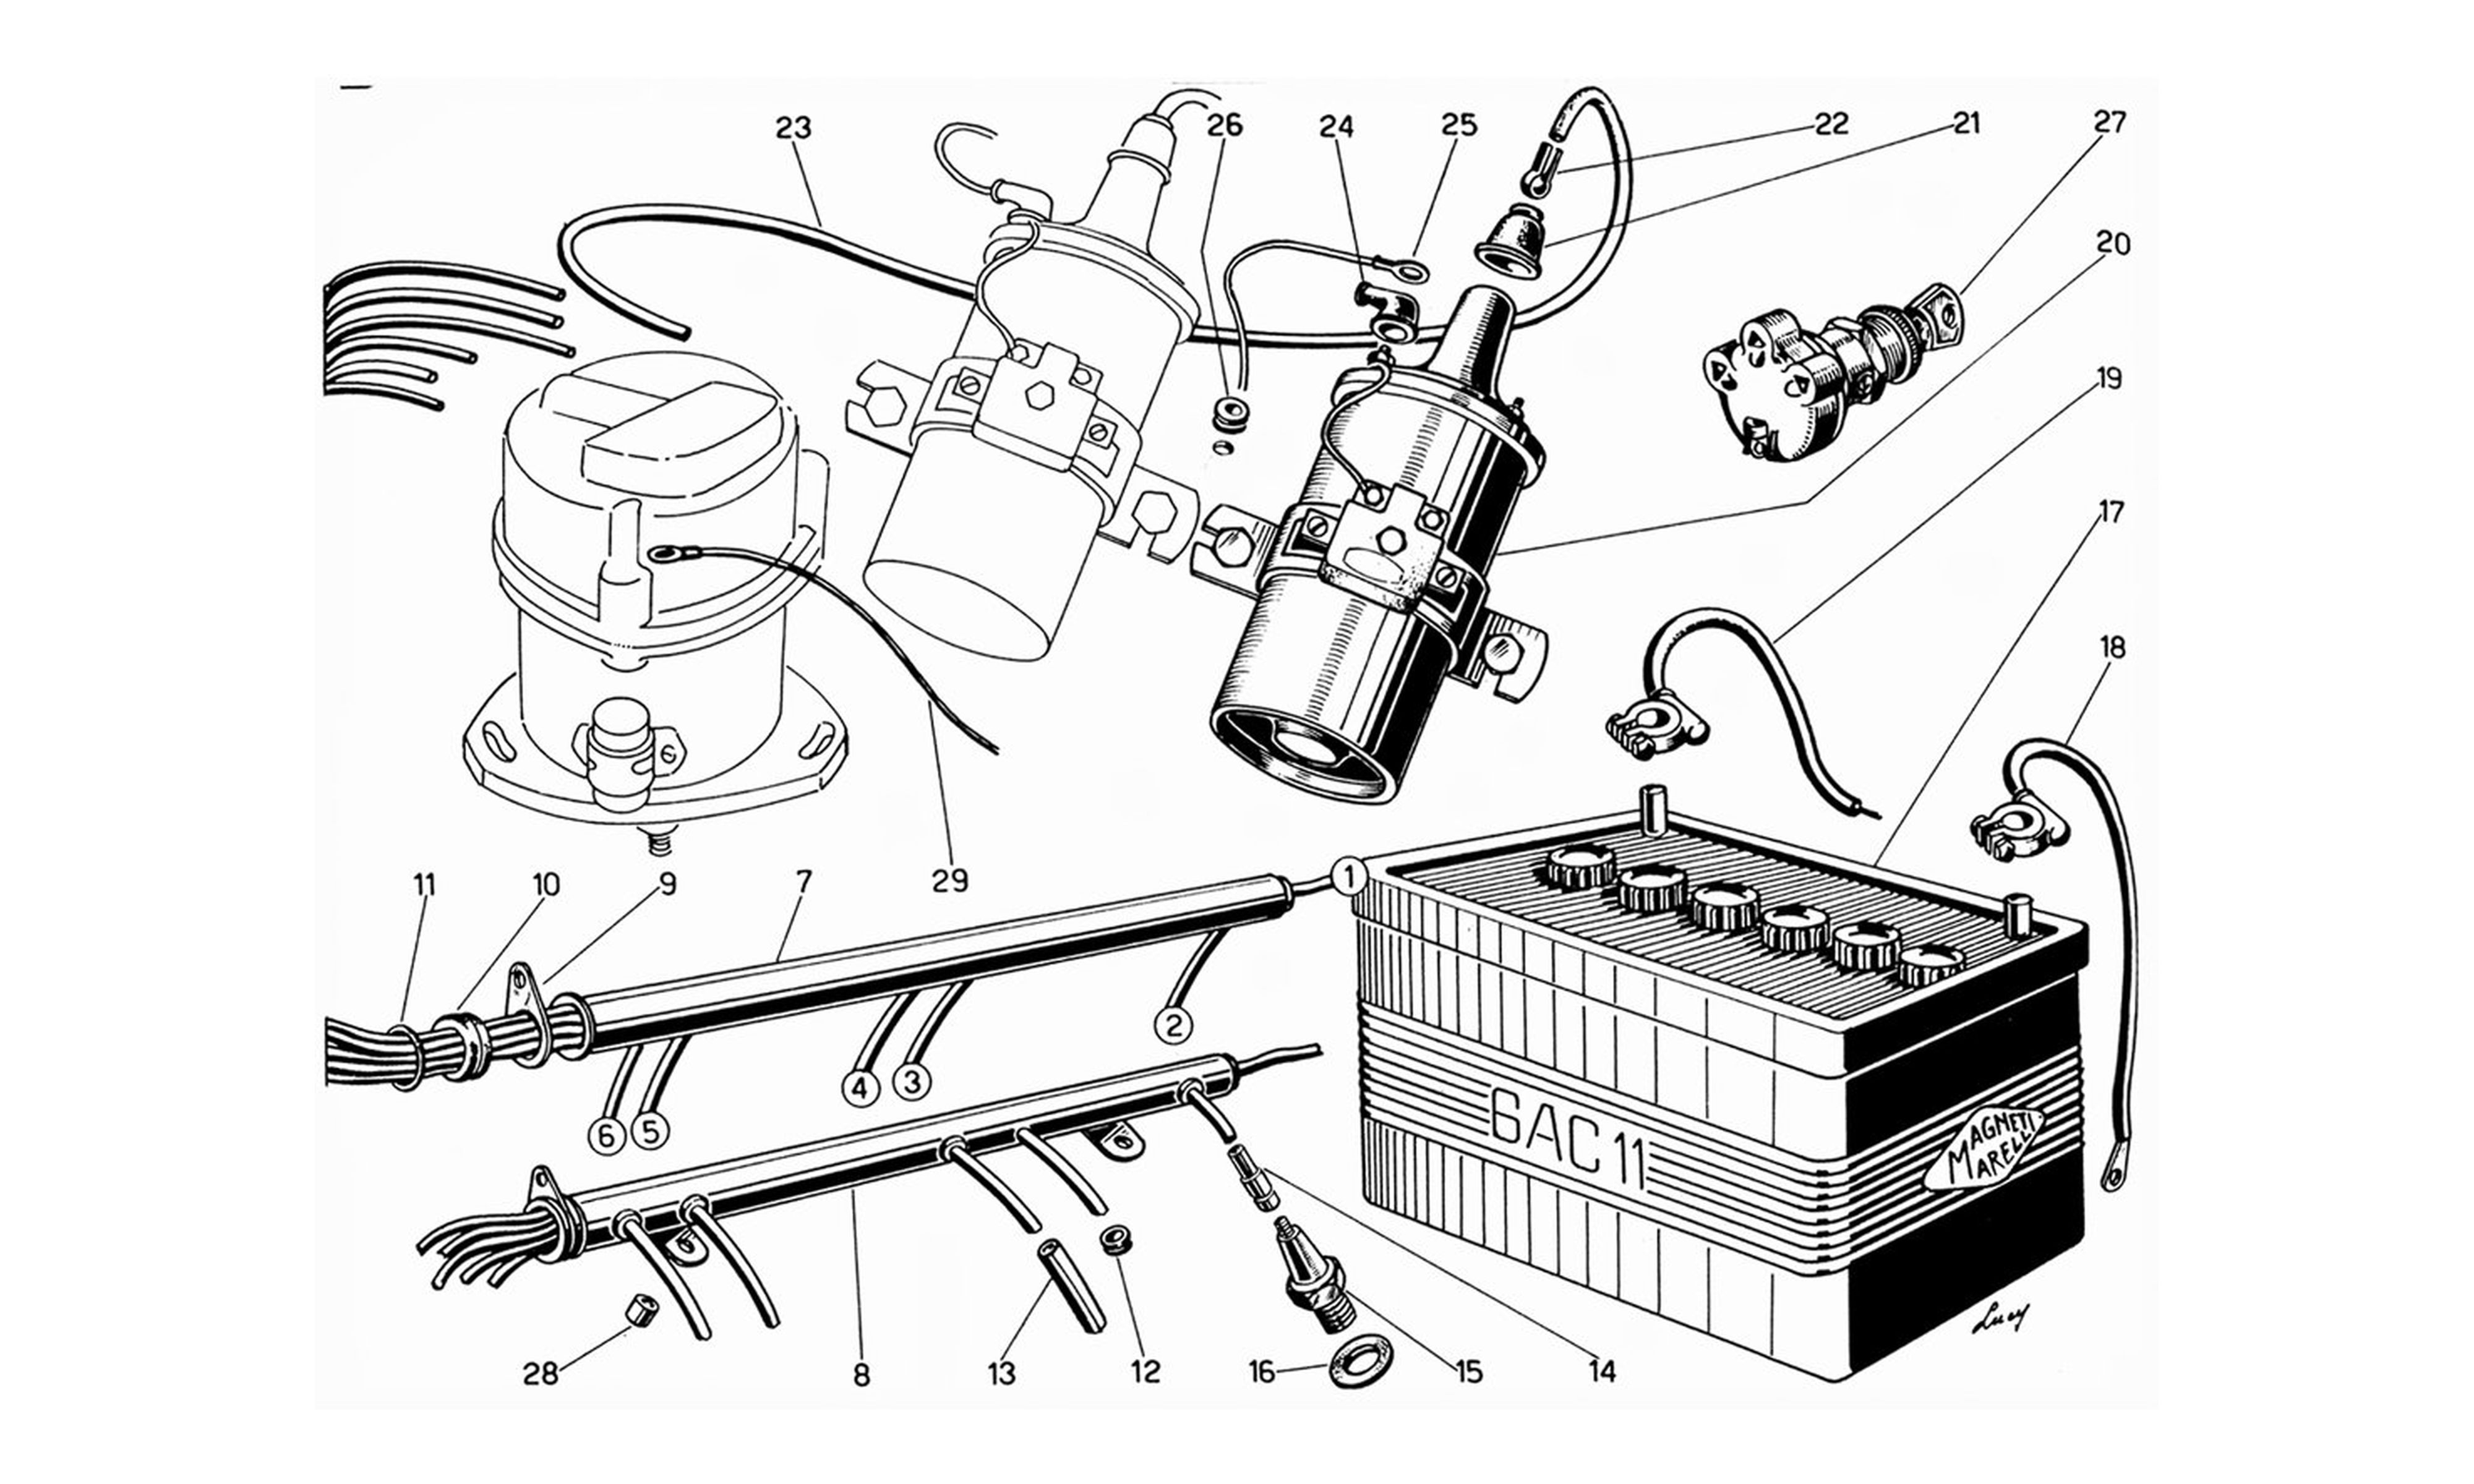 Schematic: Wiring - Ignition Coils and Battery